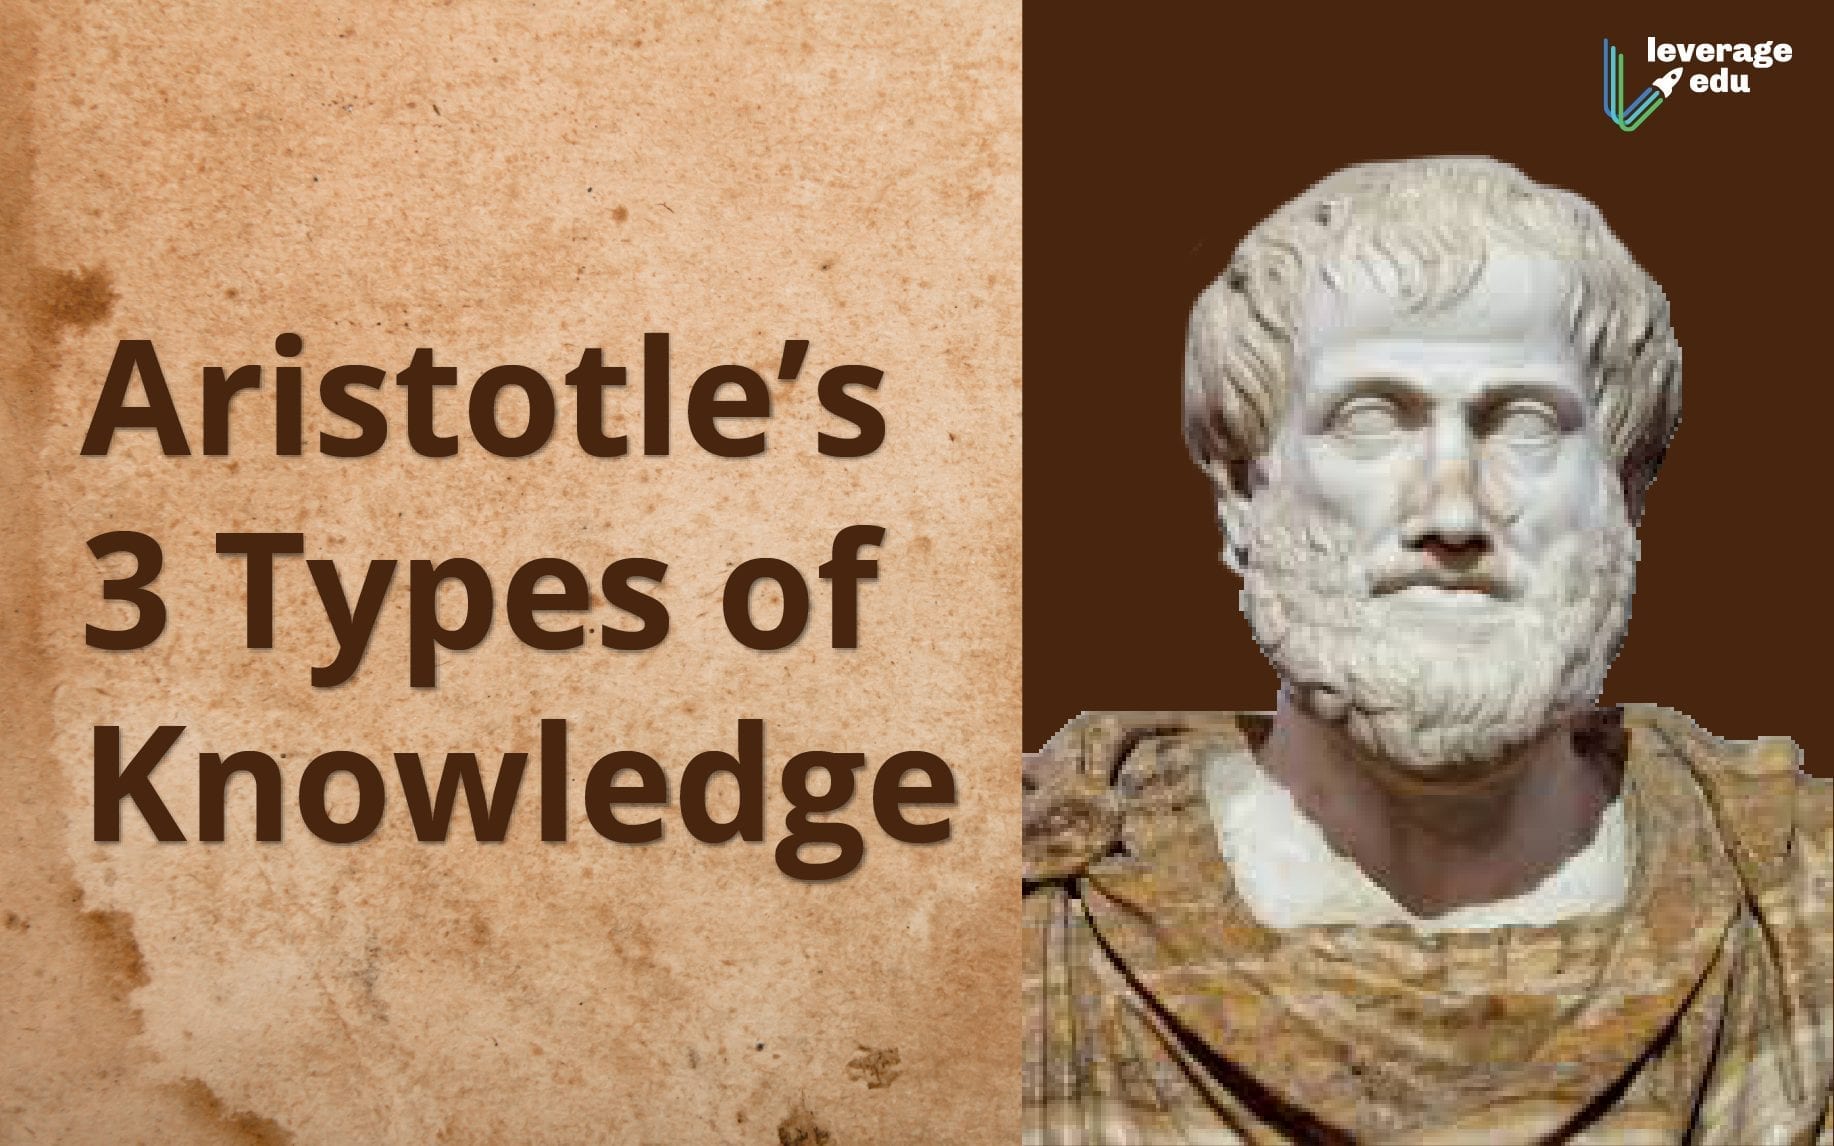 Comment on Aristotle’s 3 Types of Knowledge and Its Relevance Today by Team Leverage Edu